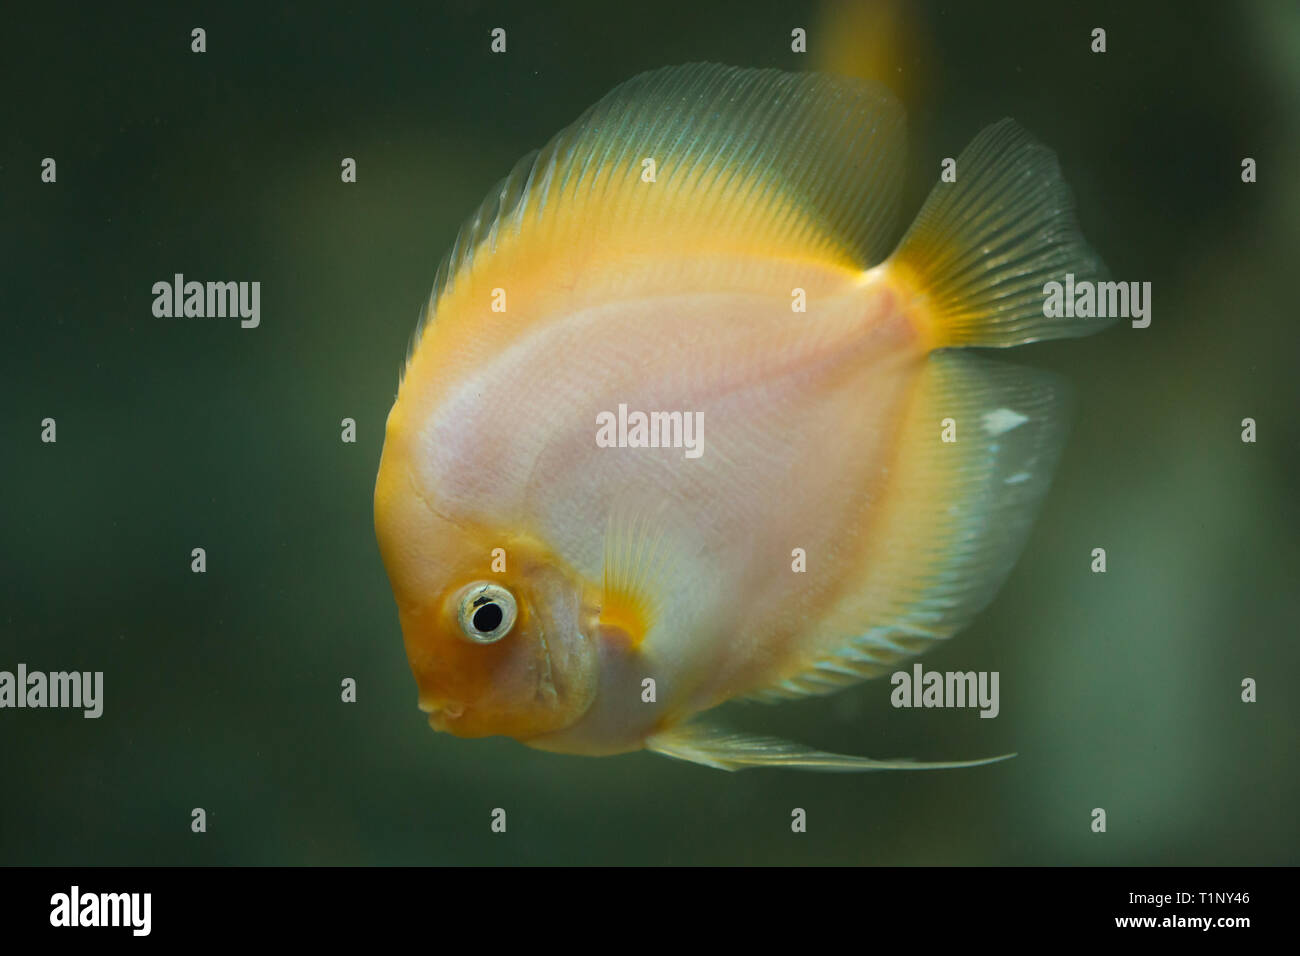 Brown discus (Symphysodon aequifasciatus), also known as the blue discus. Stock Photo